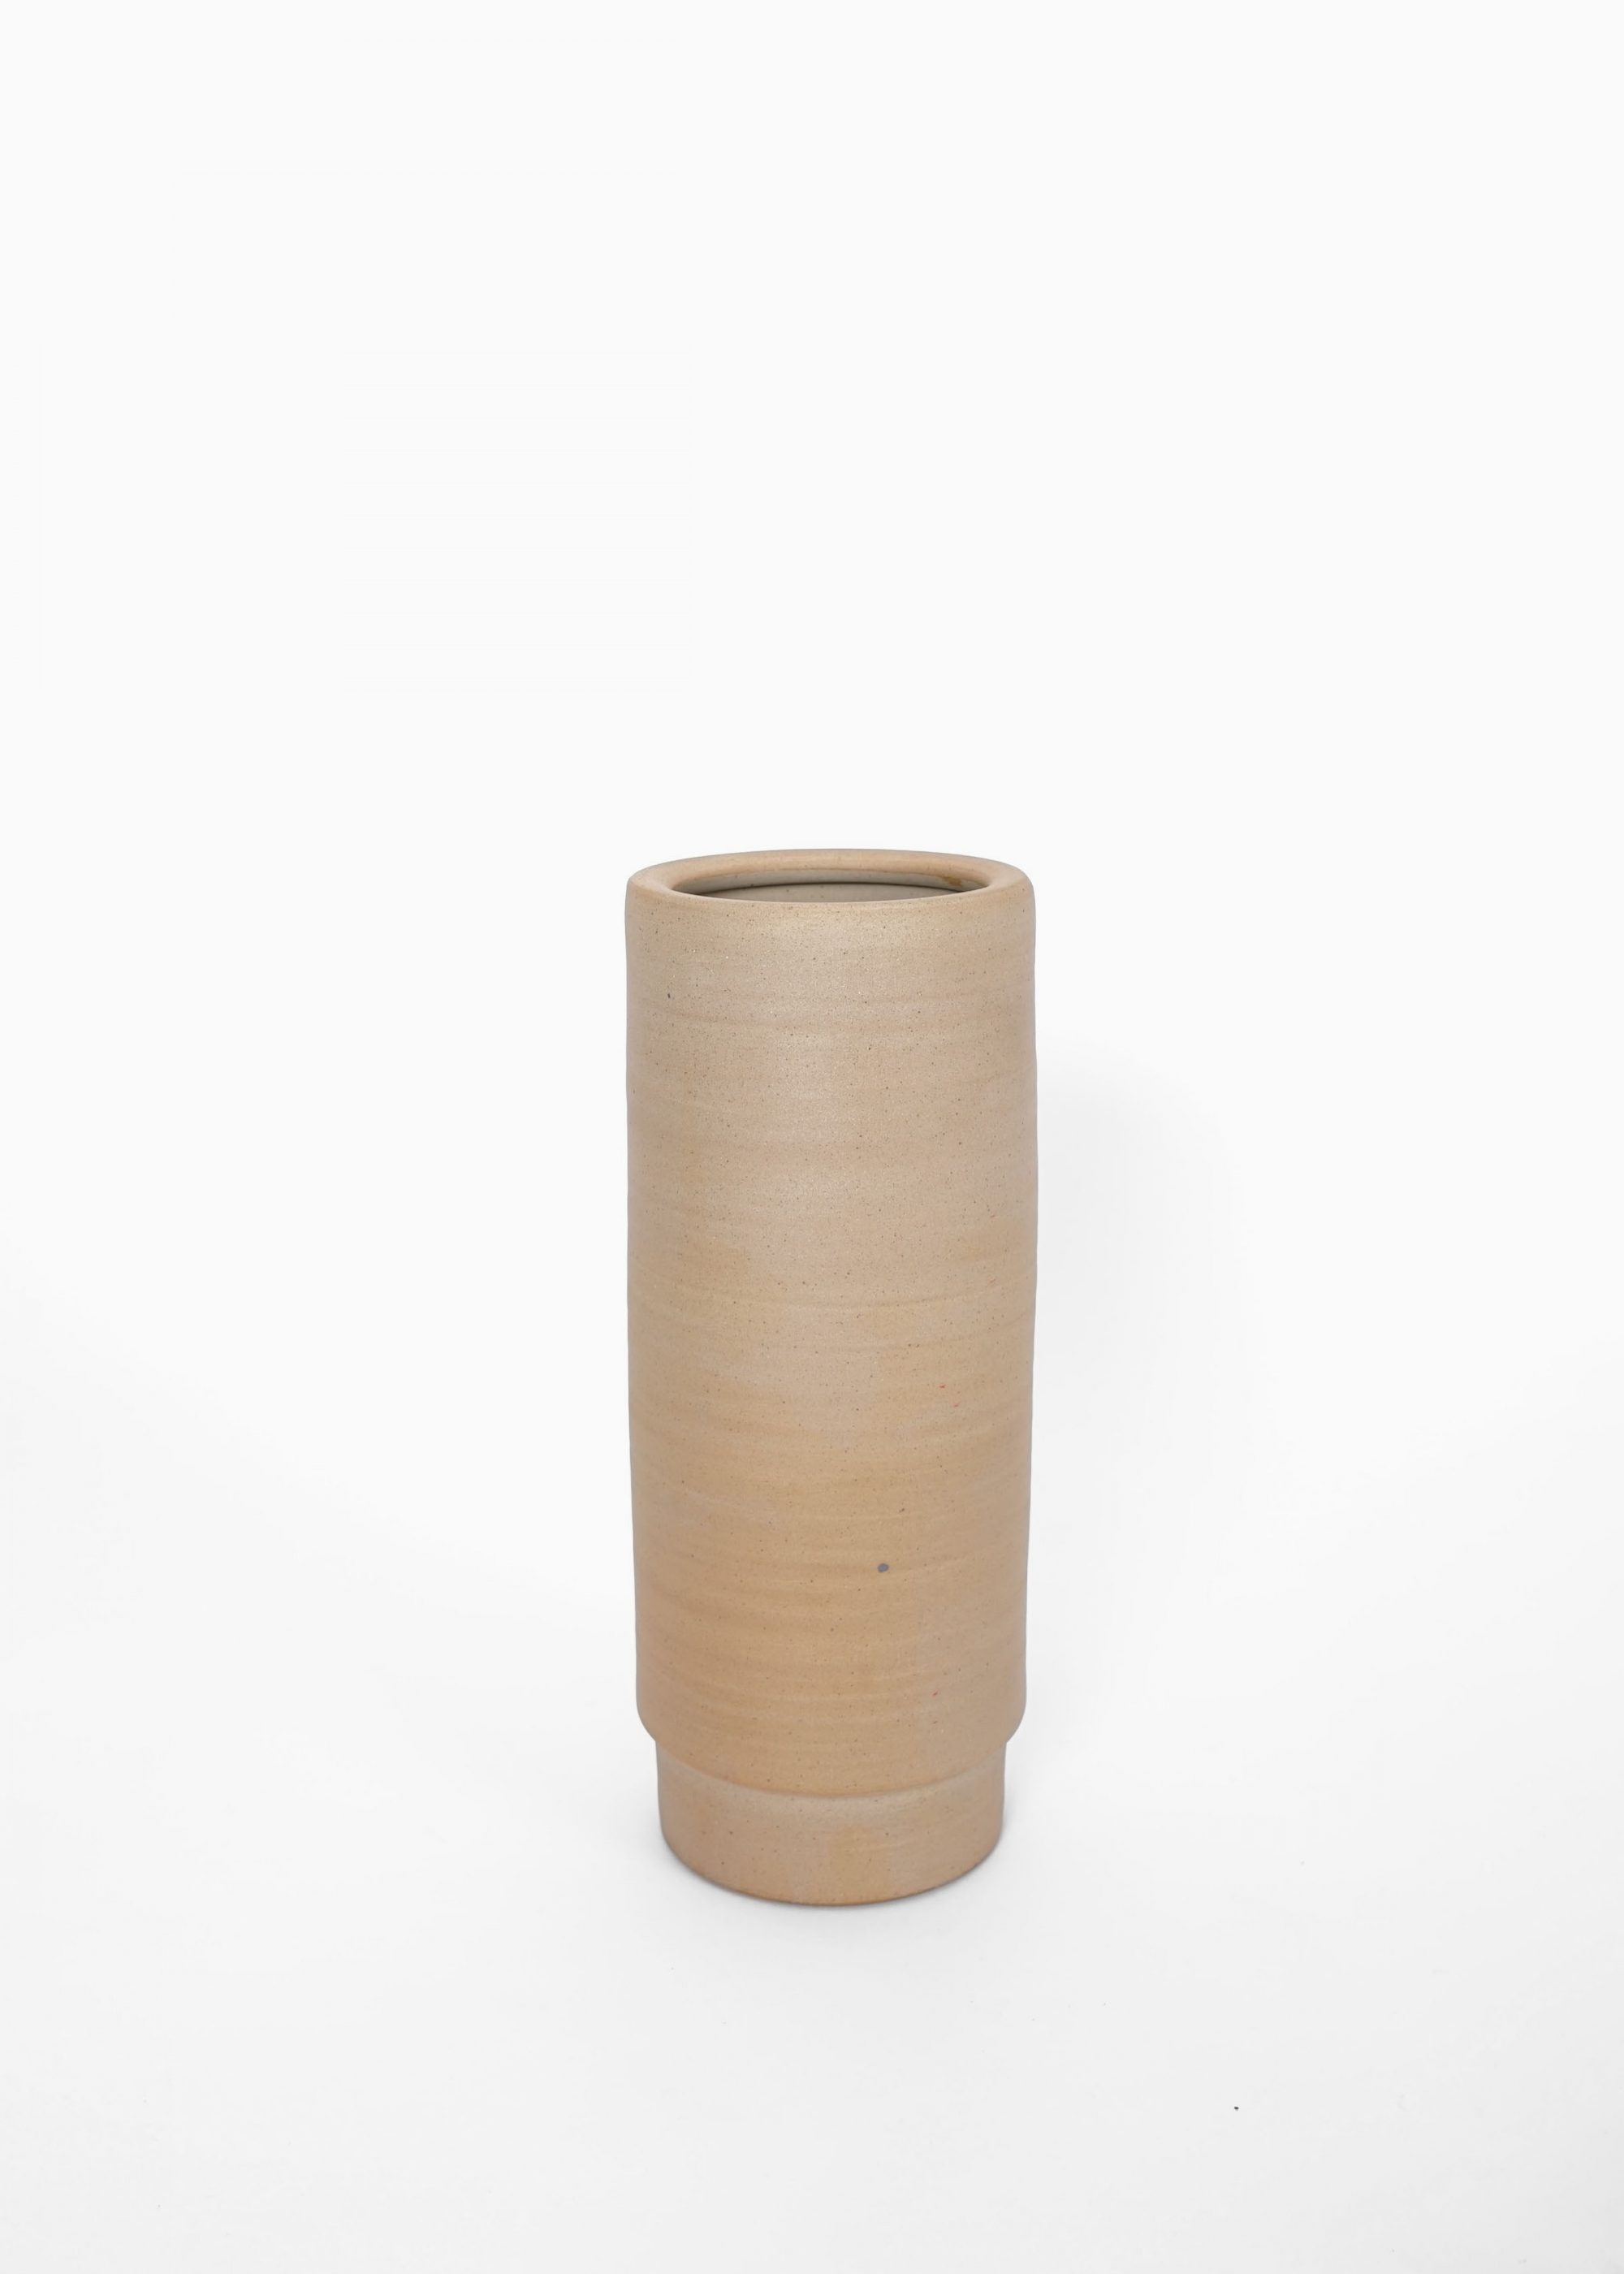 Product image for N° ICSD8 BEUYS Vase L